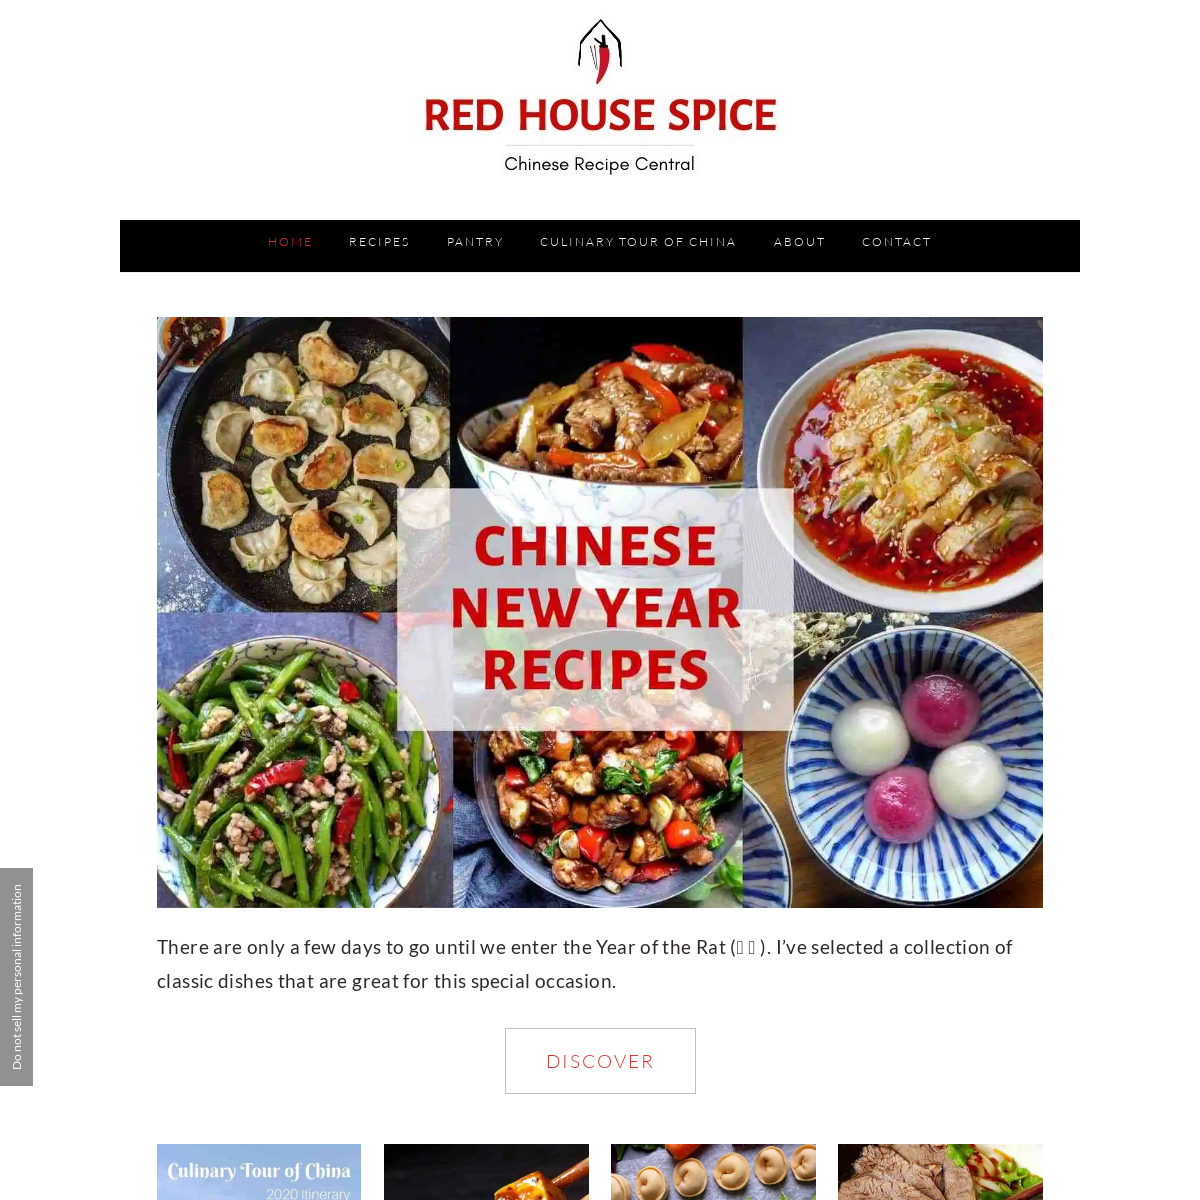 A complete backup of redhousespice.com